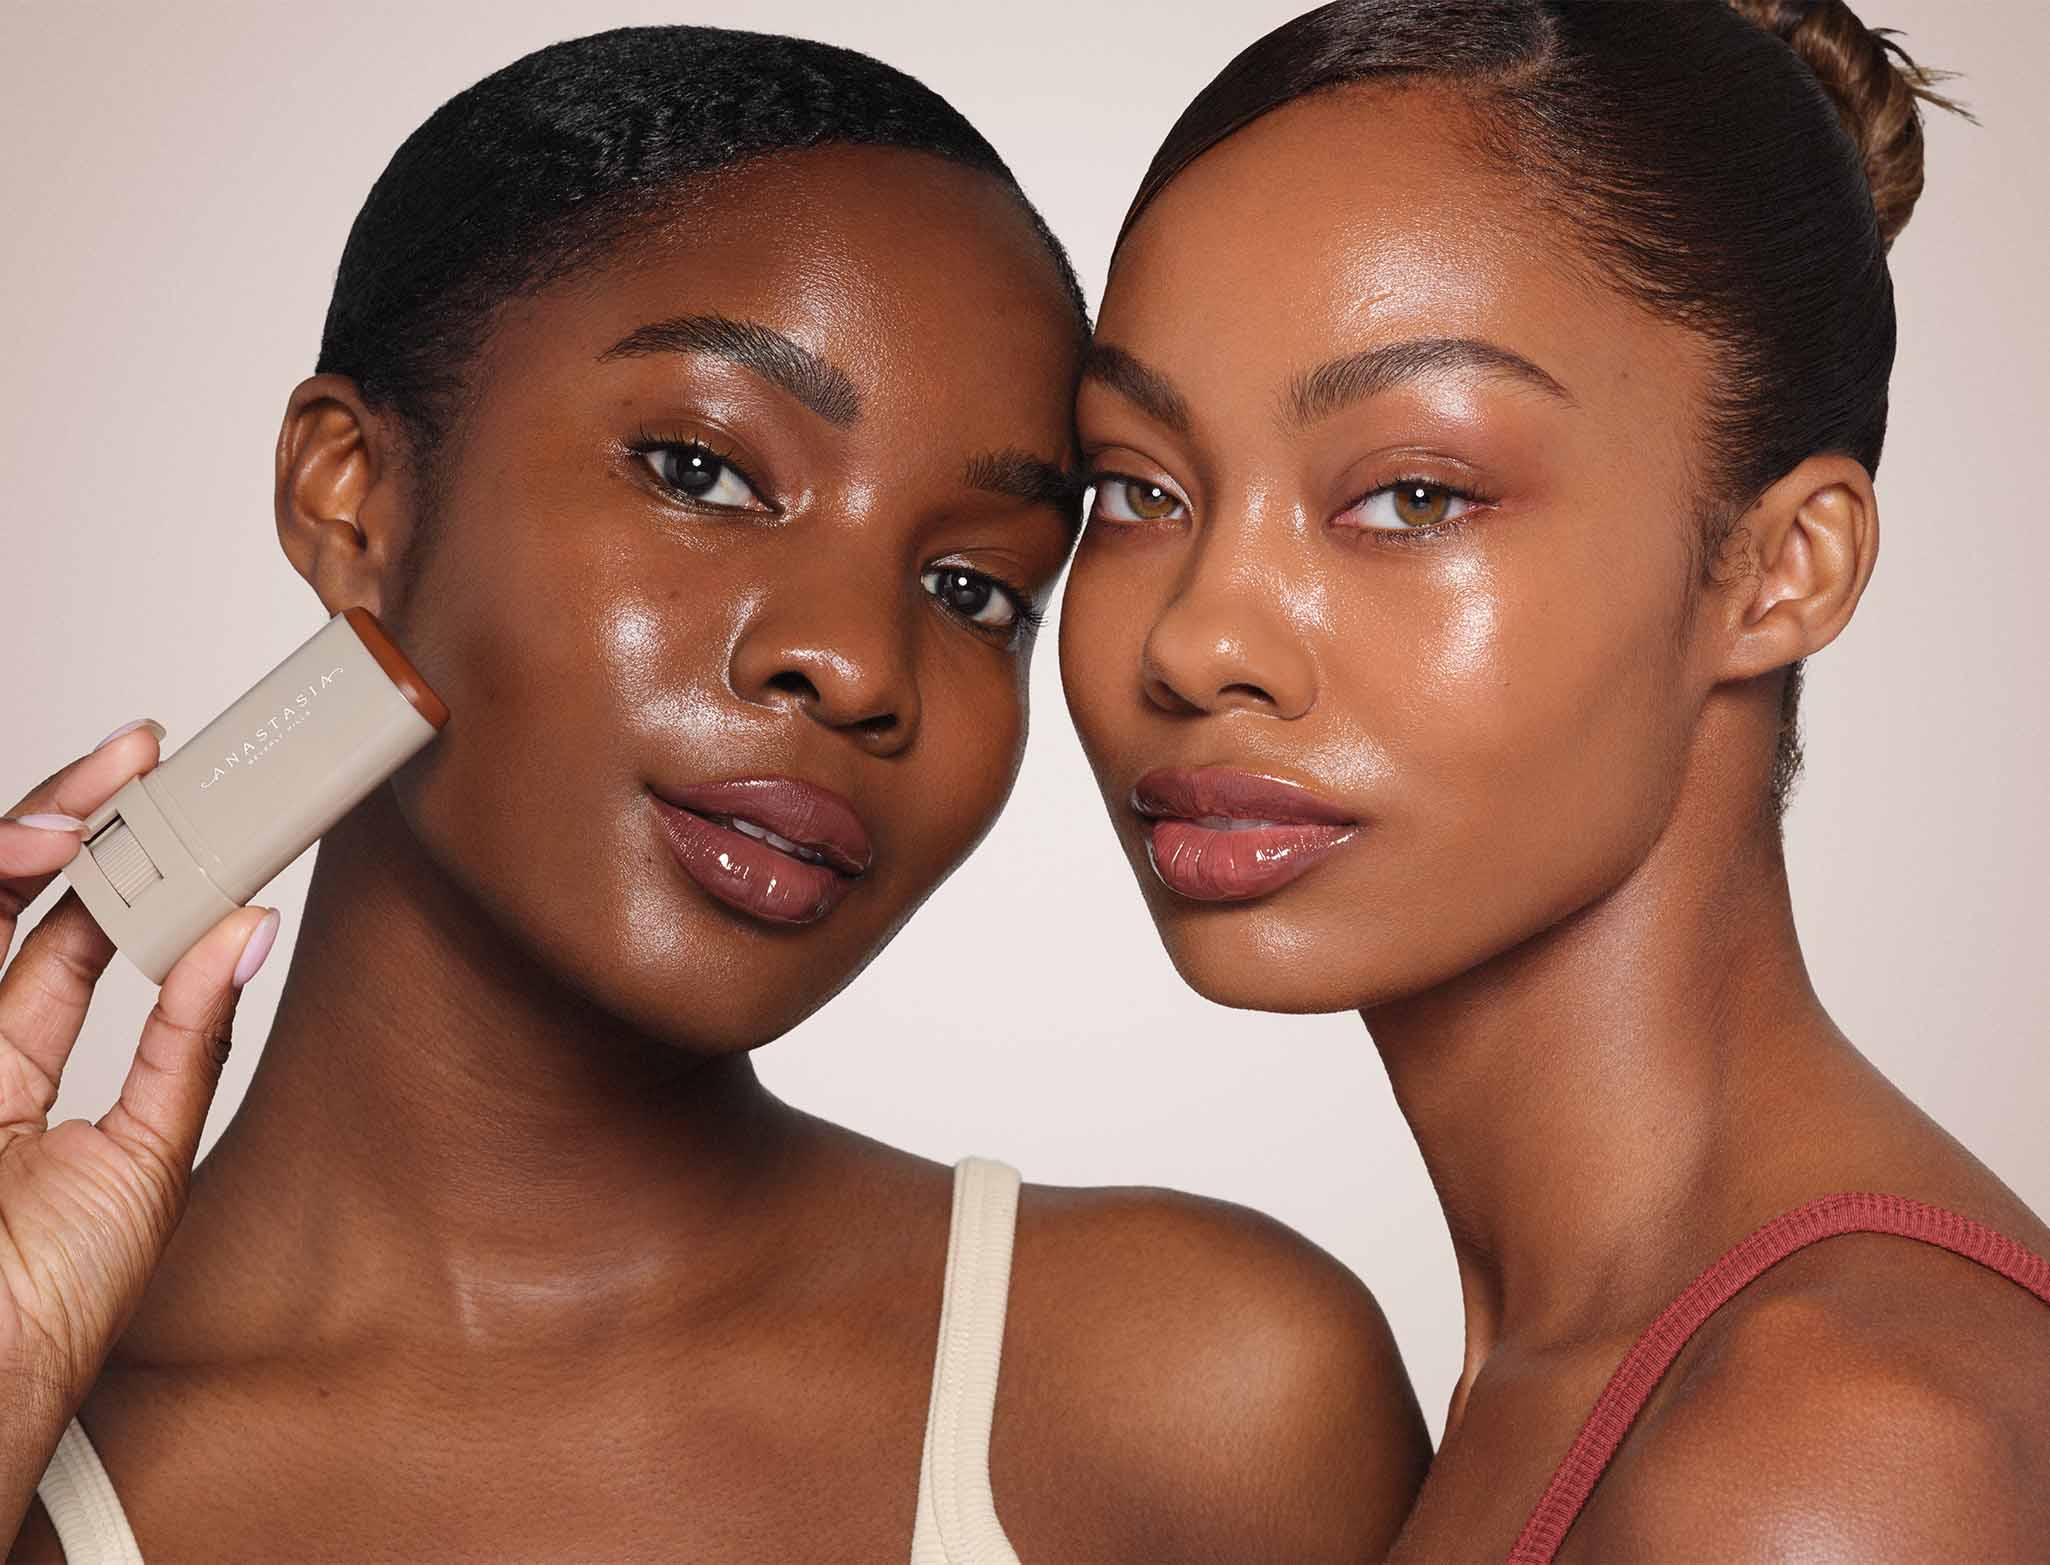 Pro Tips for Beauty Balm, Image is of two models wearing Beauty Balm